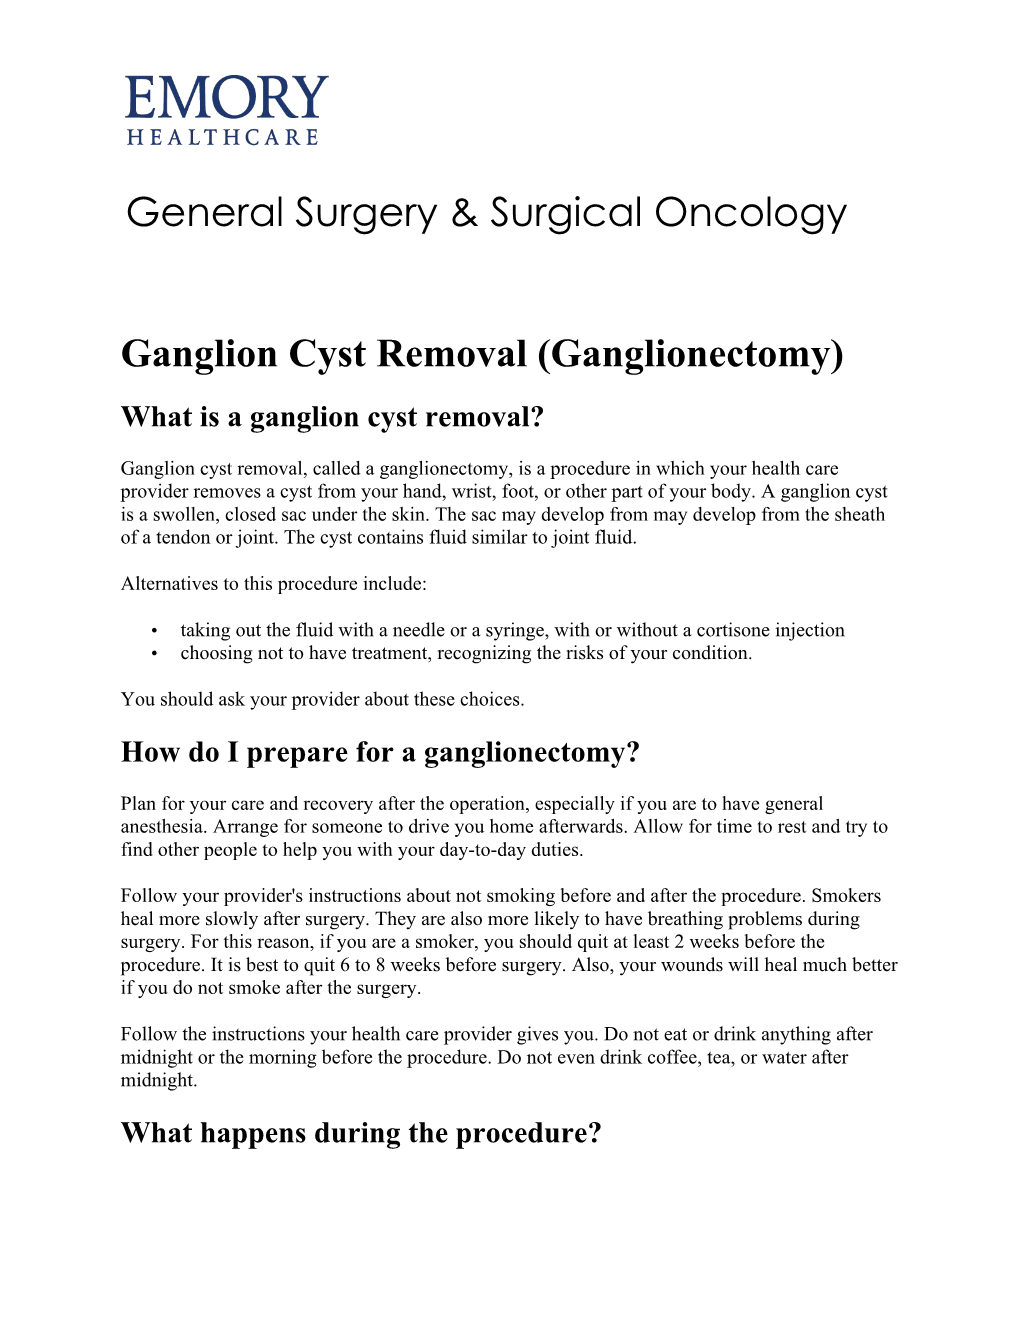 Ganglion Cyst Removal (Ganglionectomy) What Is a Ganglion Cyst Removal?